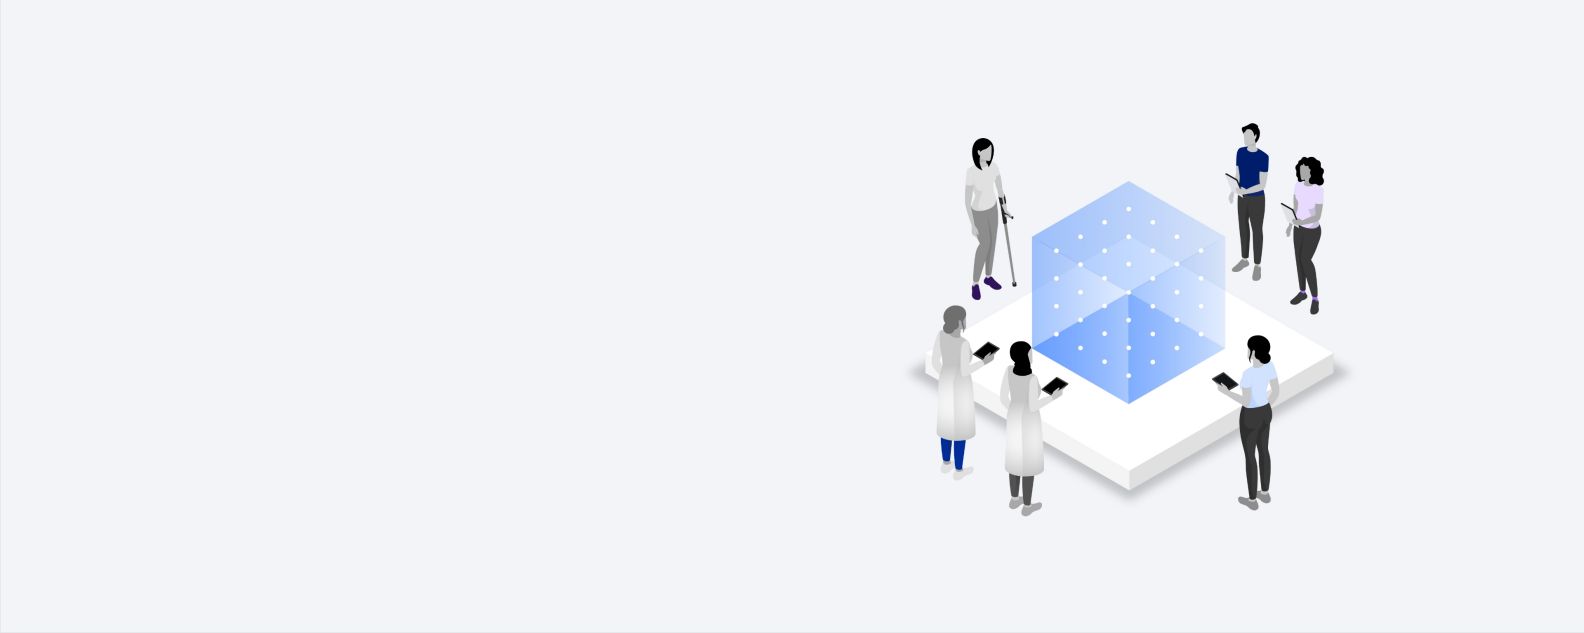 Isometric illustration of a group of people with devices analyzing data